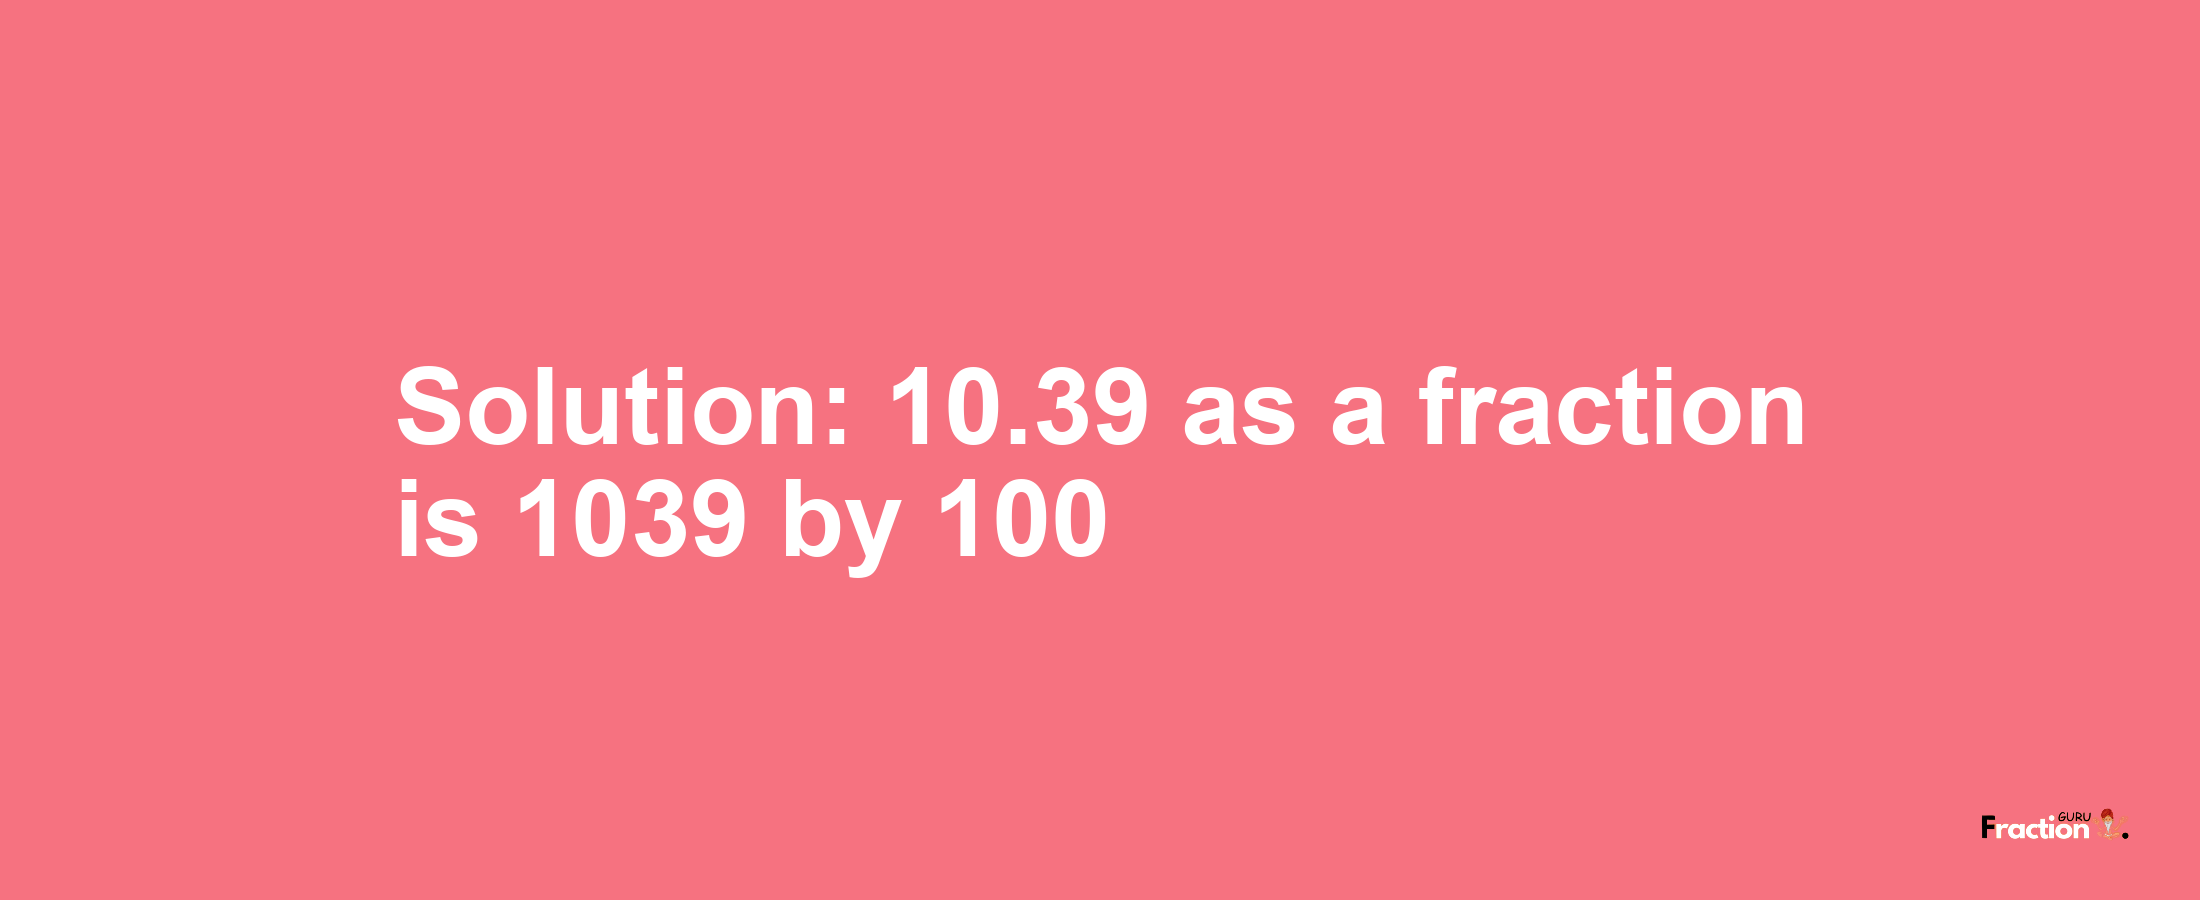 Solution:10.39 as a fraction is 1039/100